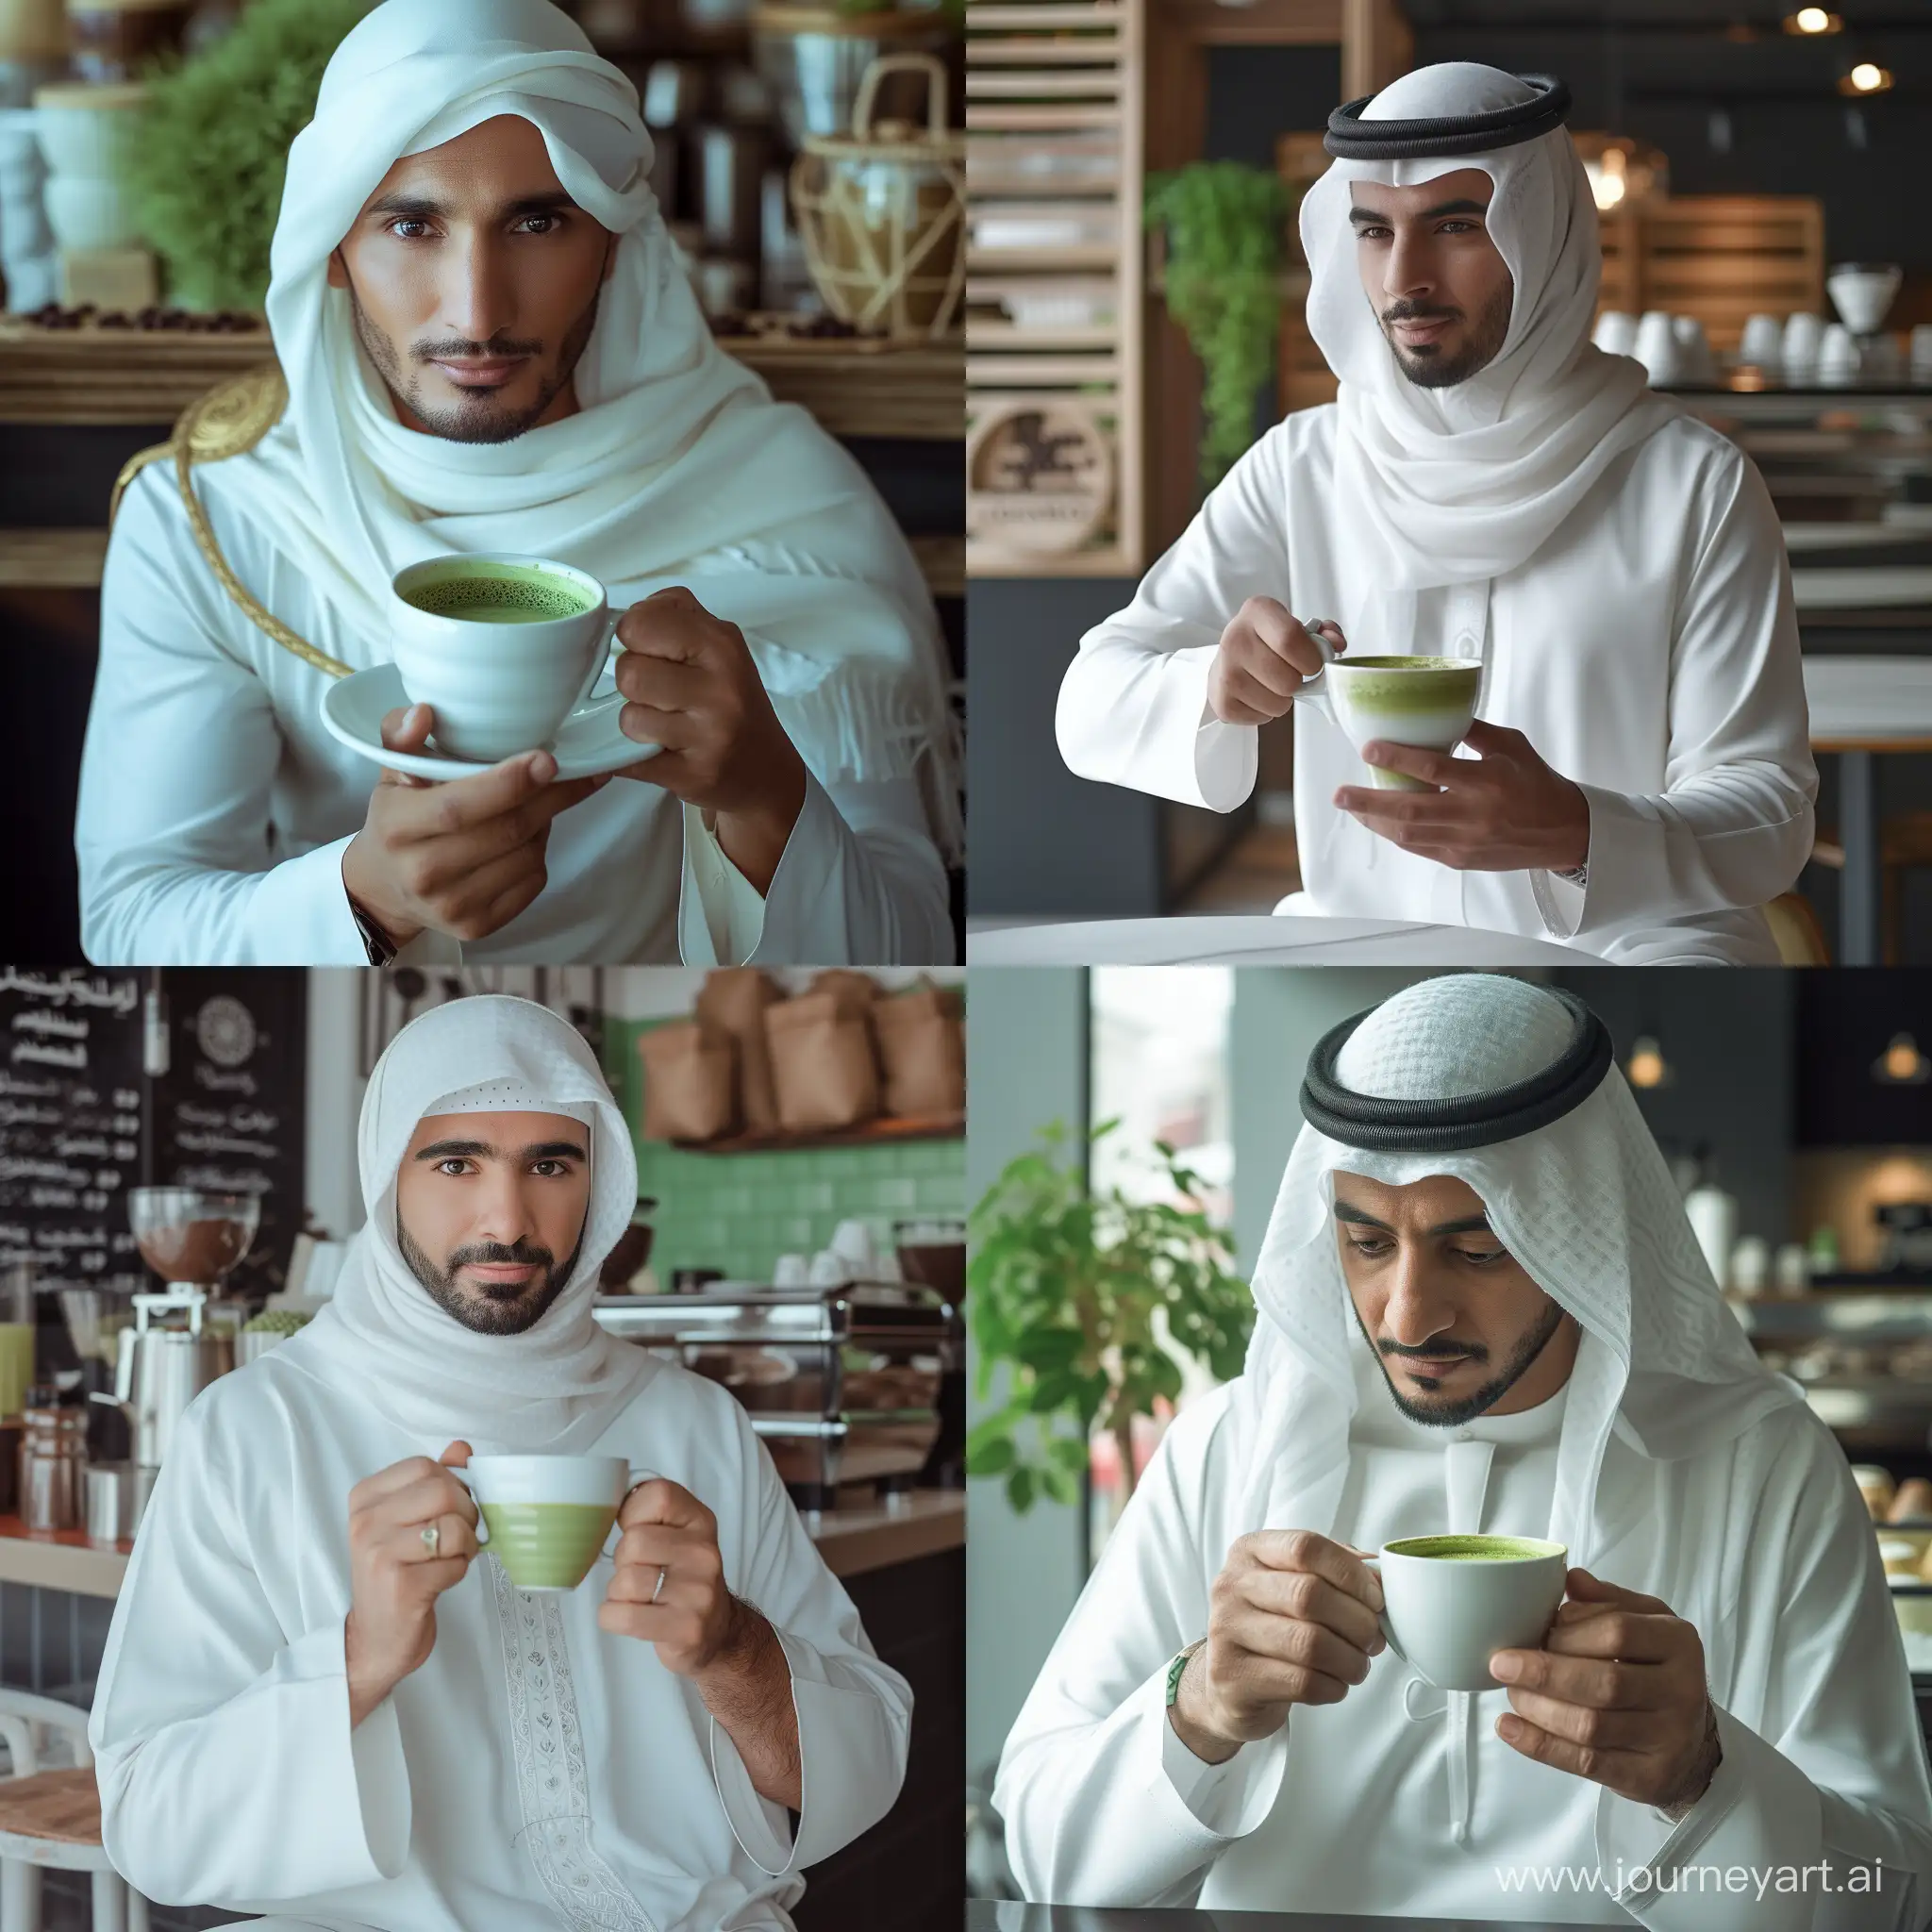 Man-in-White-Arabic-Attire-Enjoying-Coffee-in-Cafe-with-Natural-Lighting